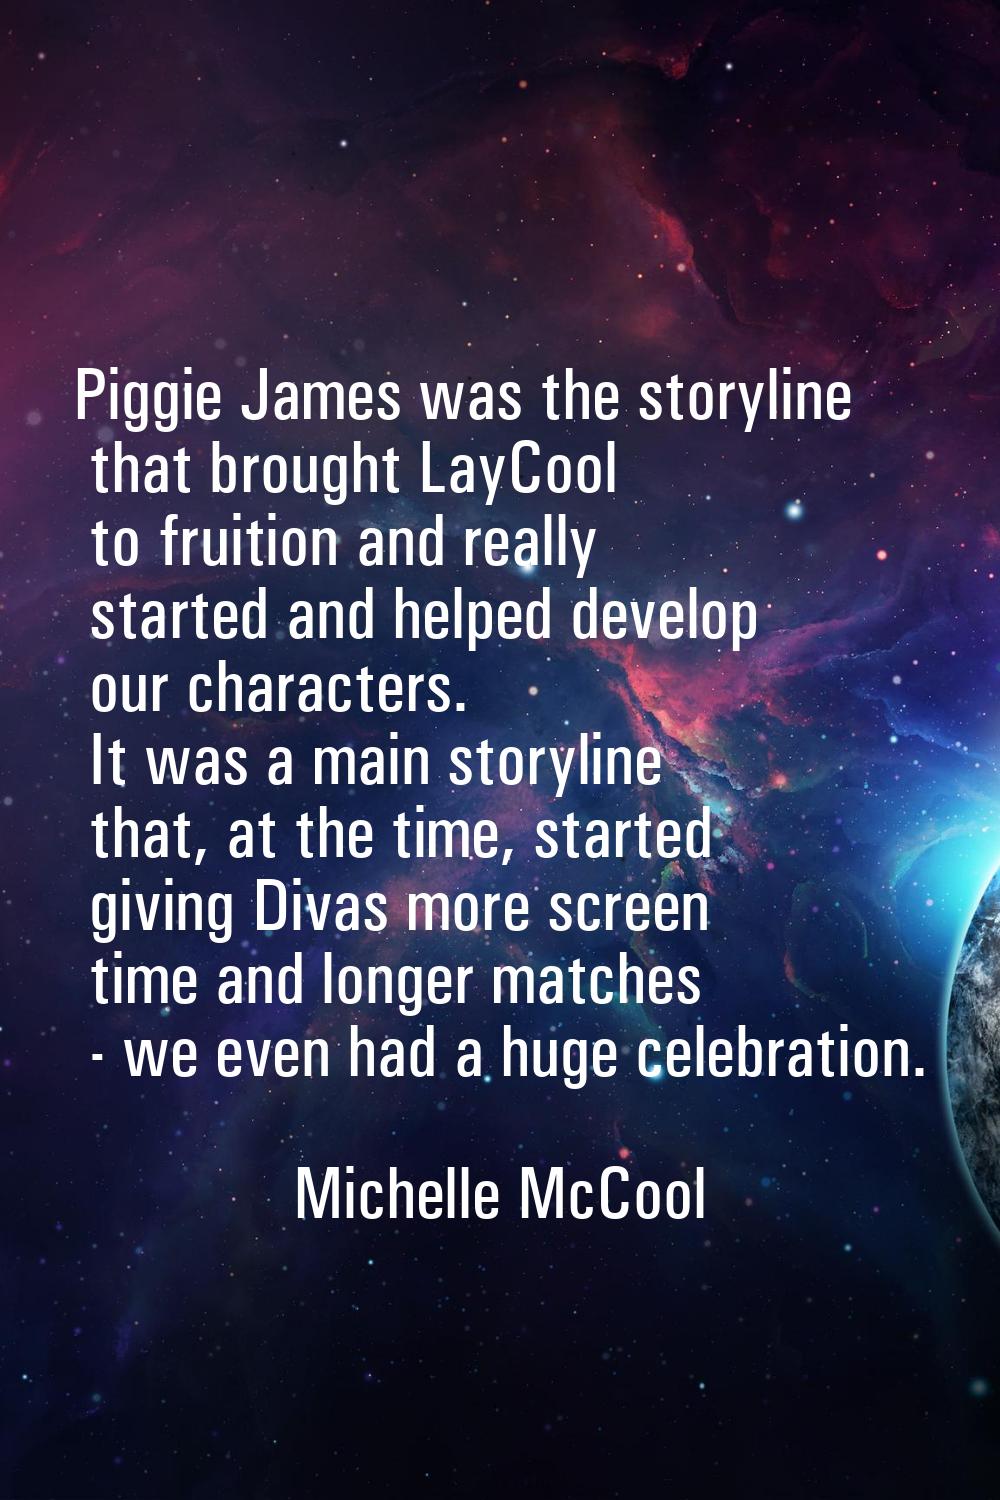 Piggie James was the storyline that brought LayCool to fruition and really started and helped devel